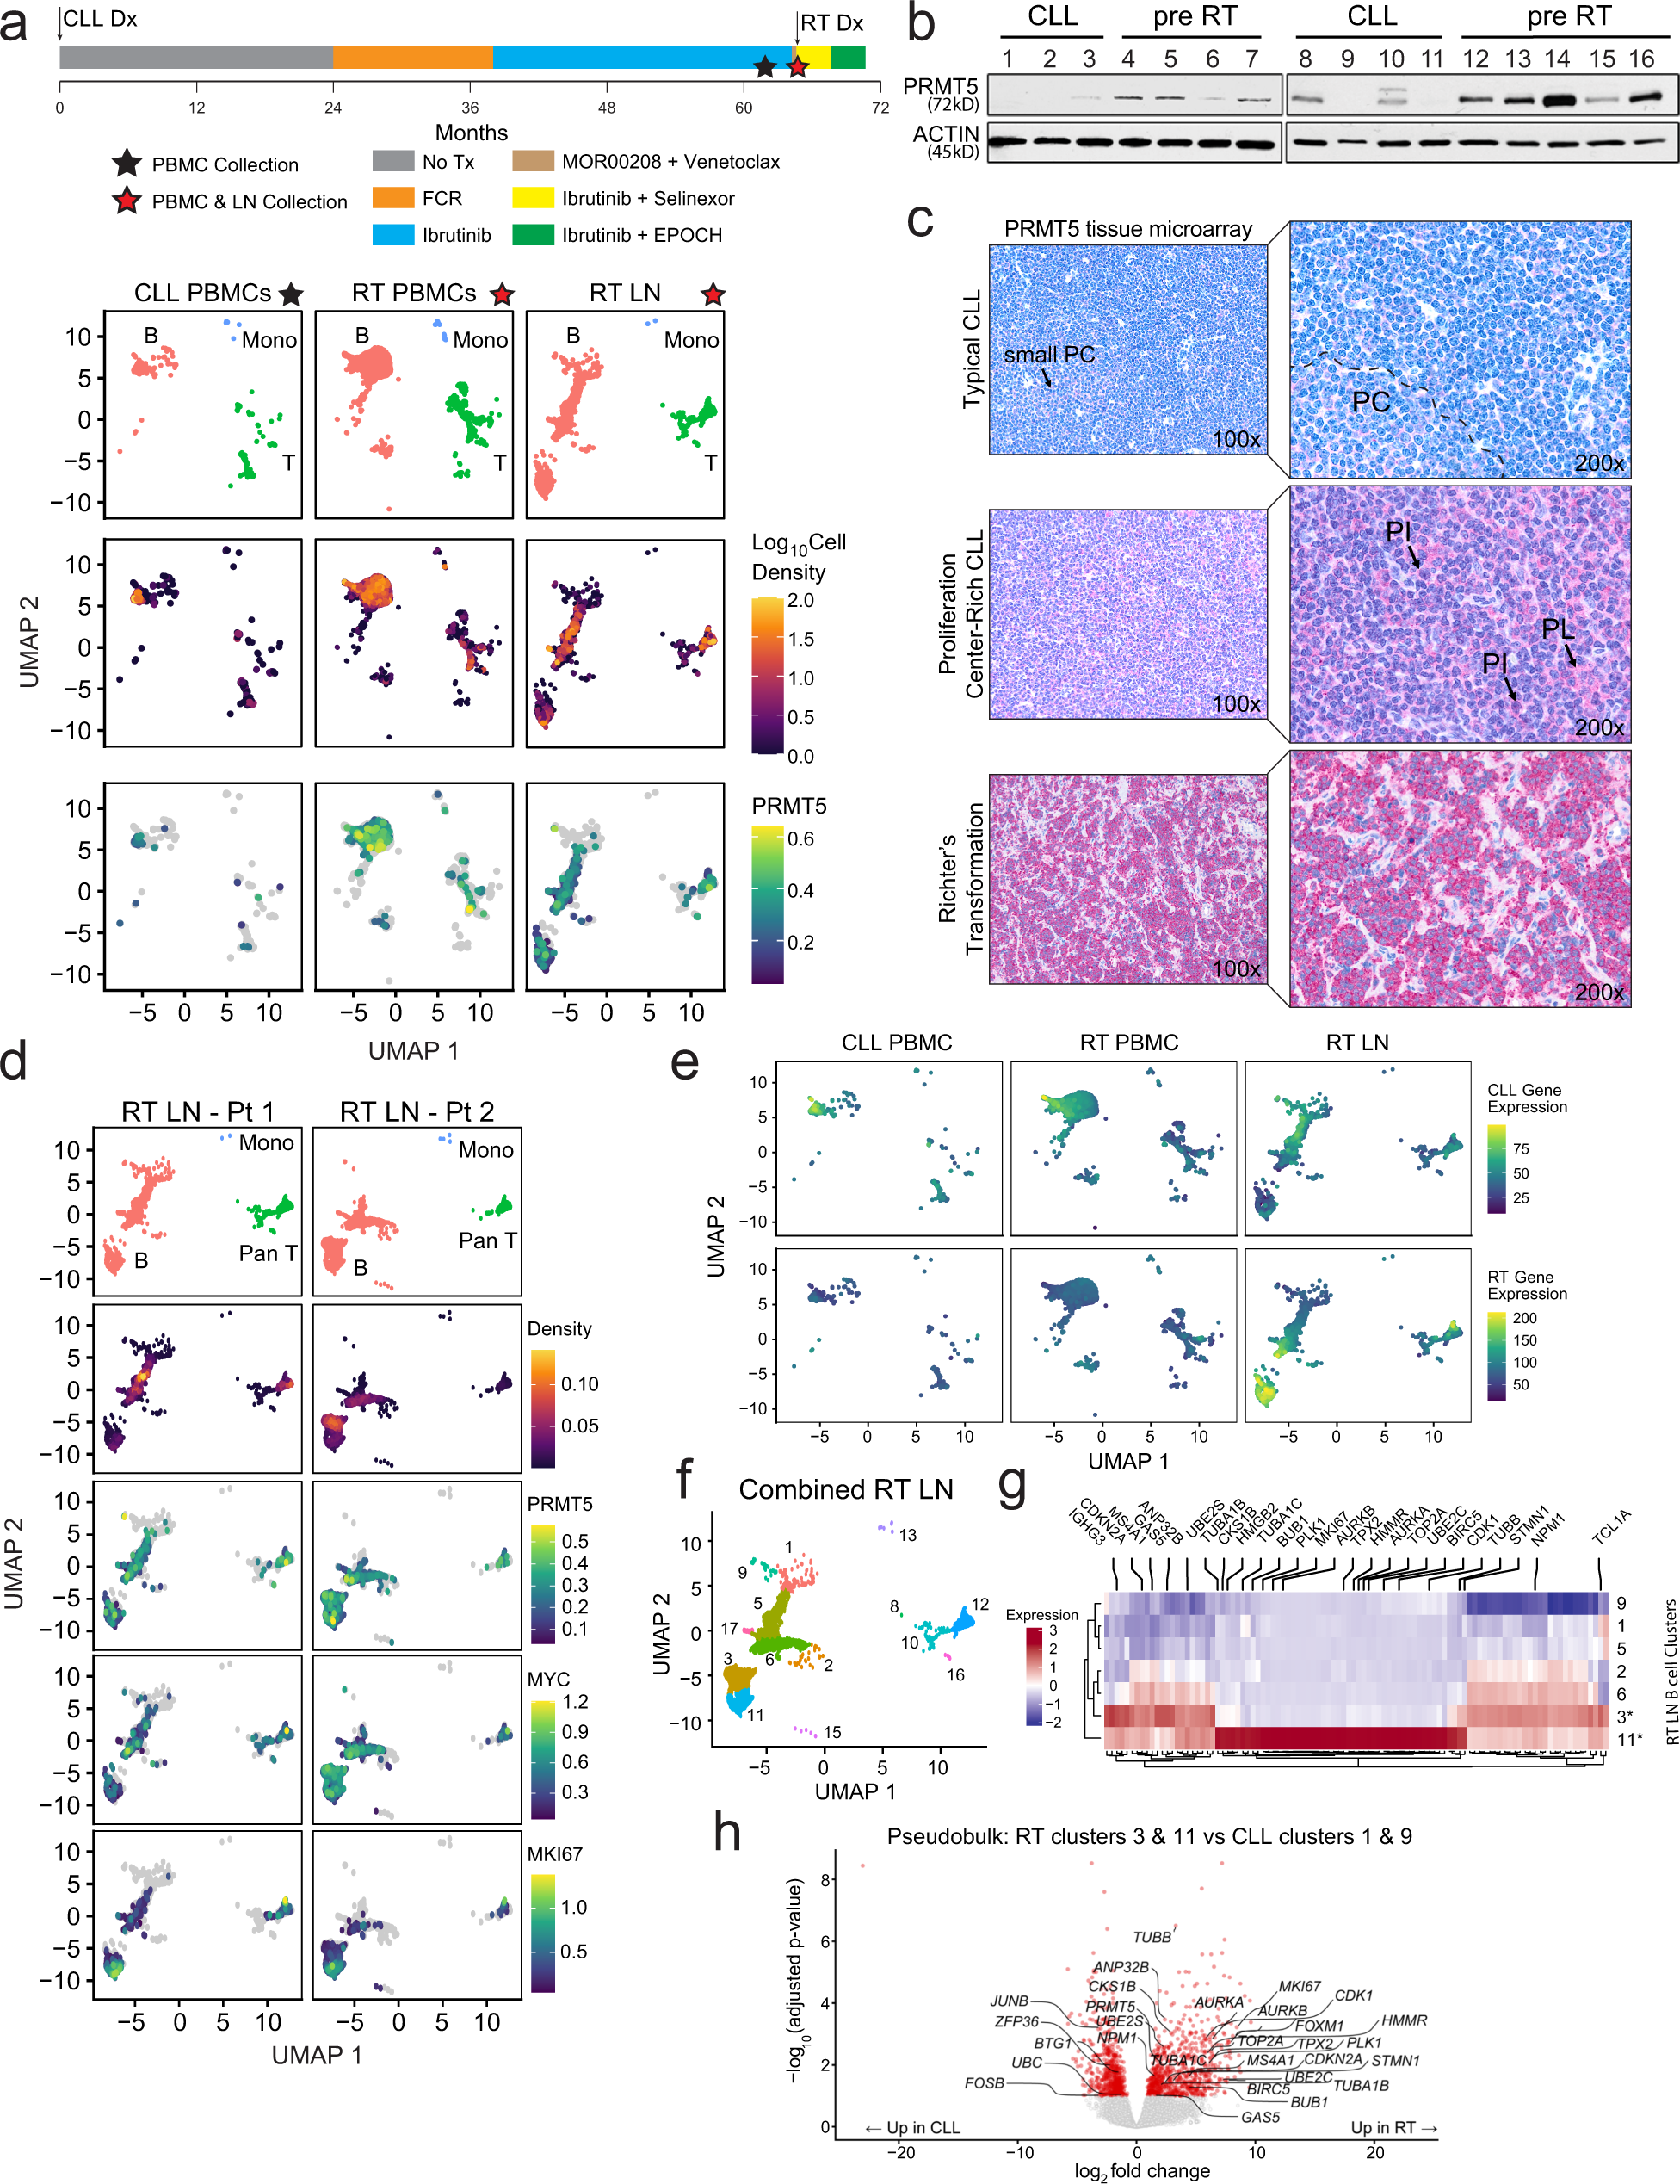 Dysregulation of PRMT5 in chronic lymphocytic leukemia promotes progression  with high risk of Richter's transformation | Nature Communications